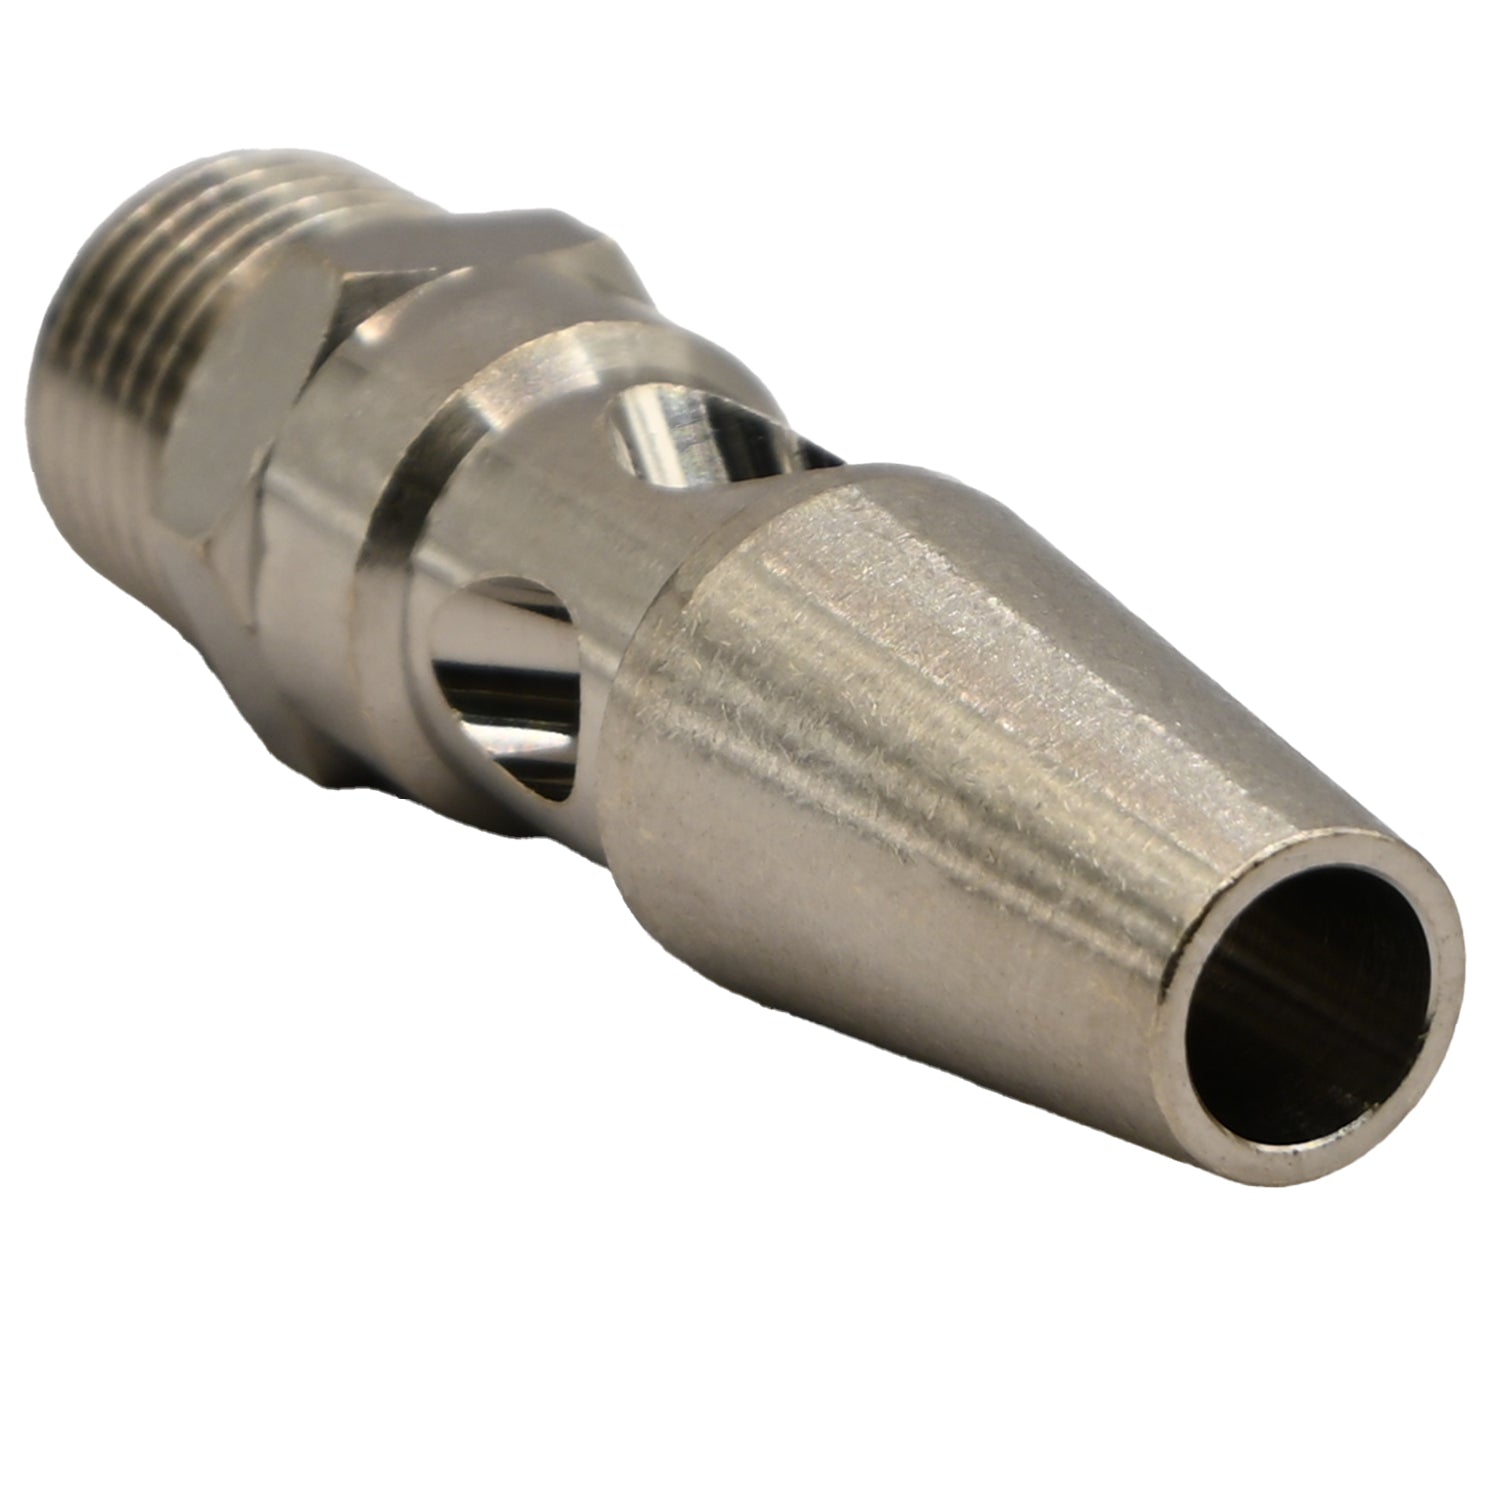 Conical metal air nozzle with threaded base and two through holes on white background. 